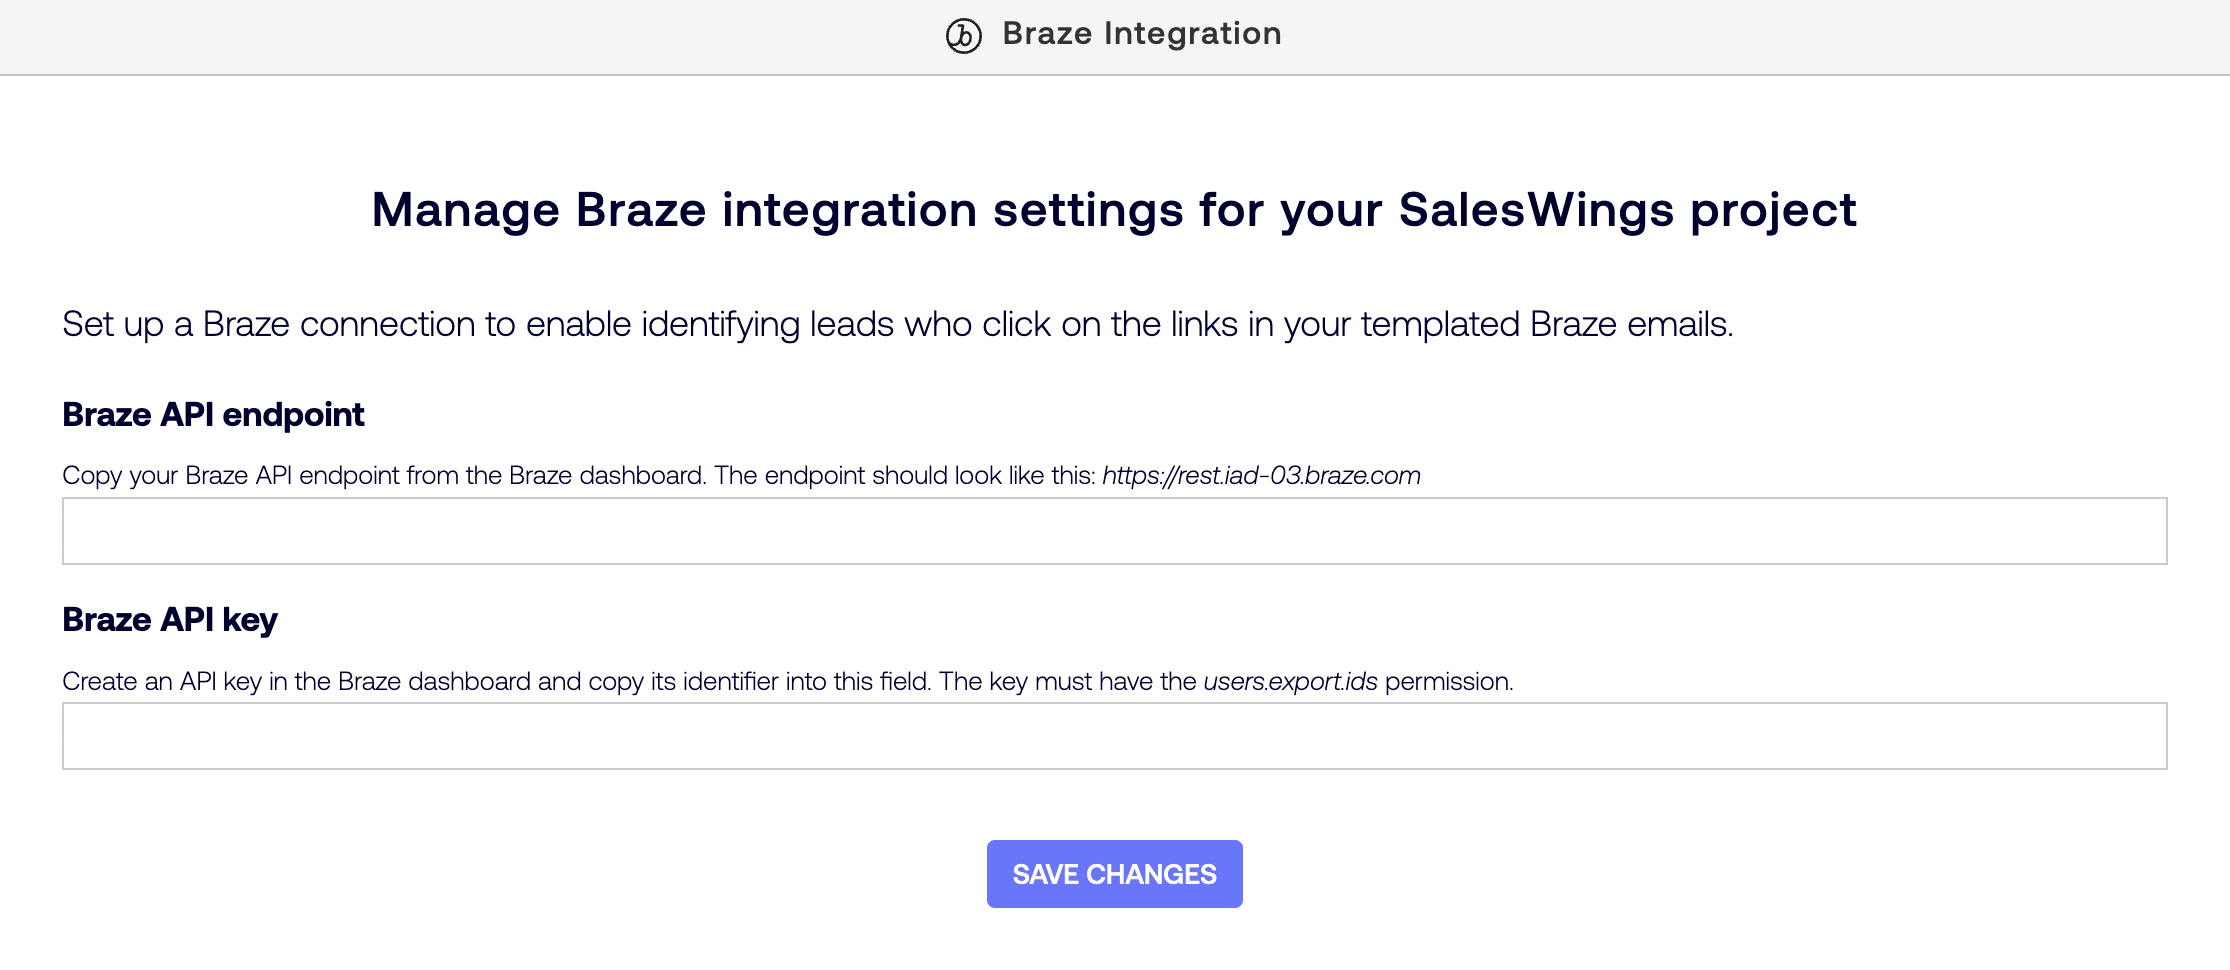 The Braze Integration section of the SalesWings Settings page.